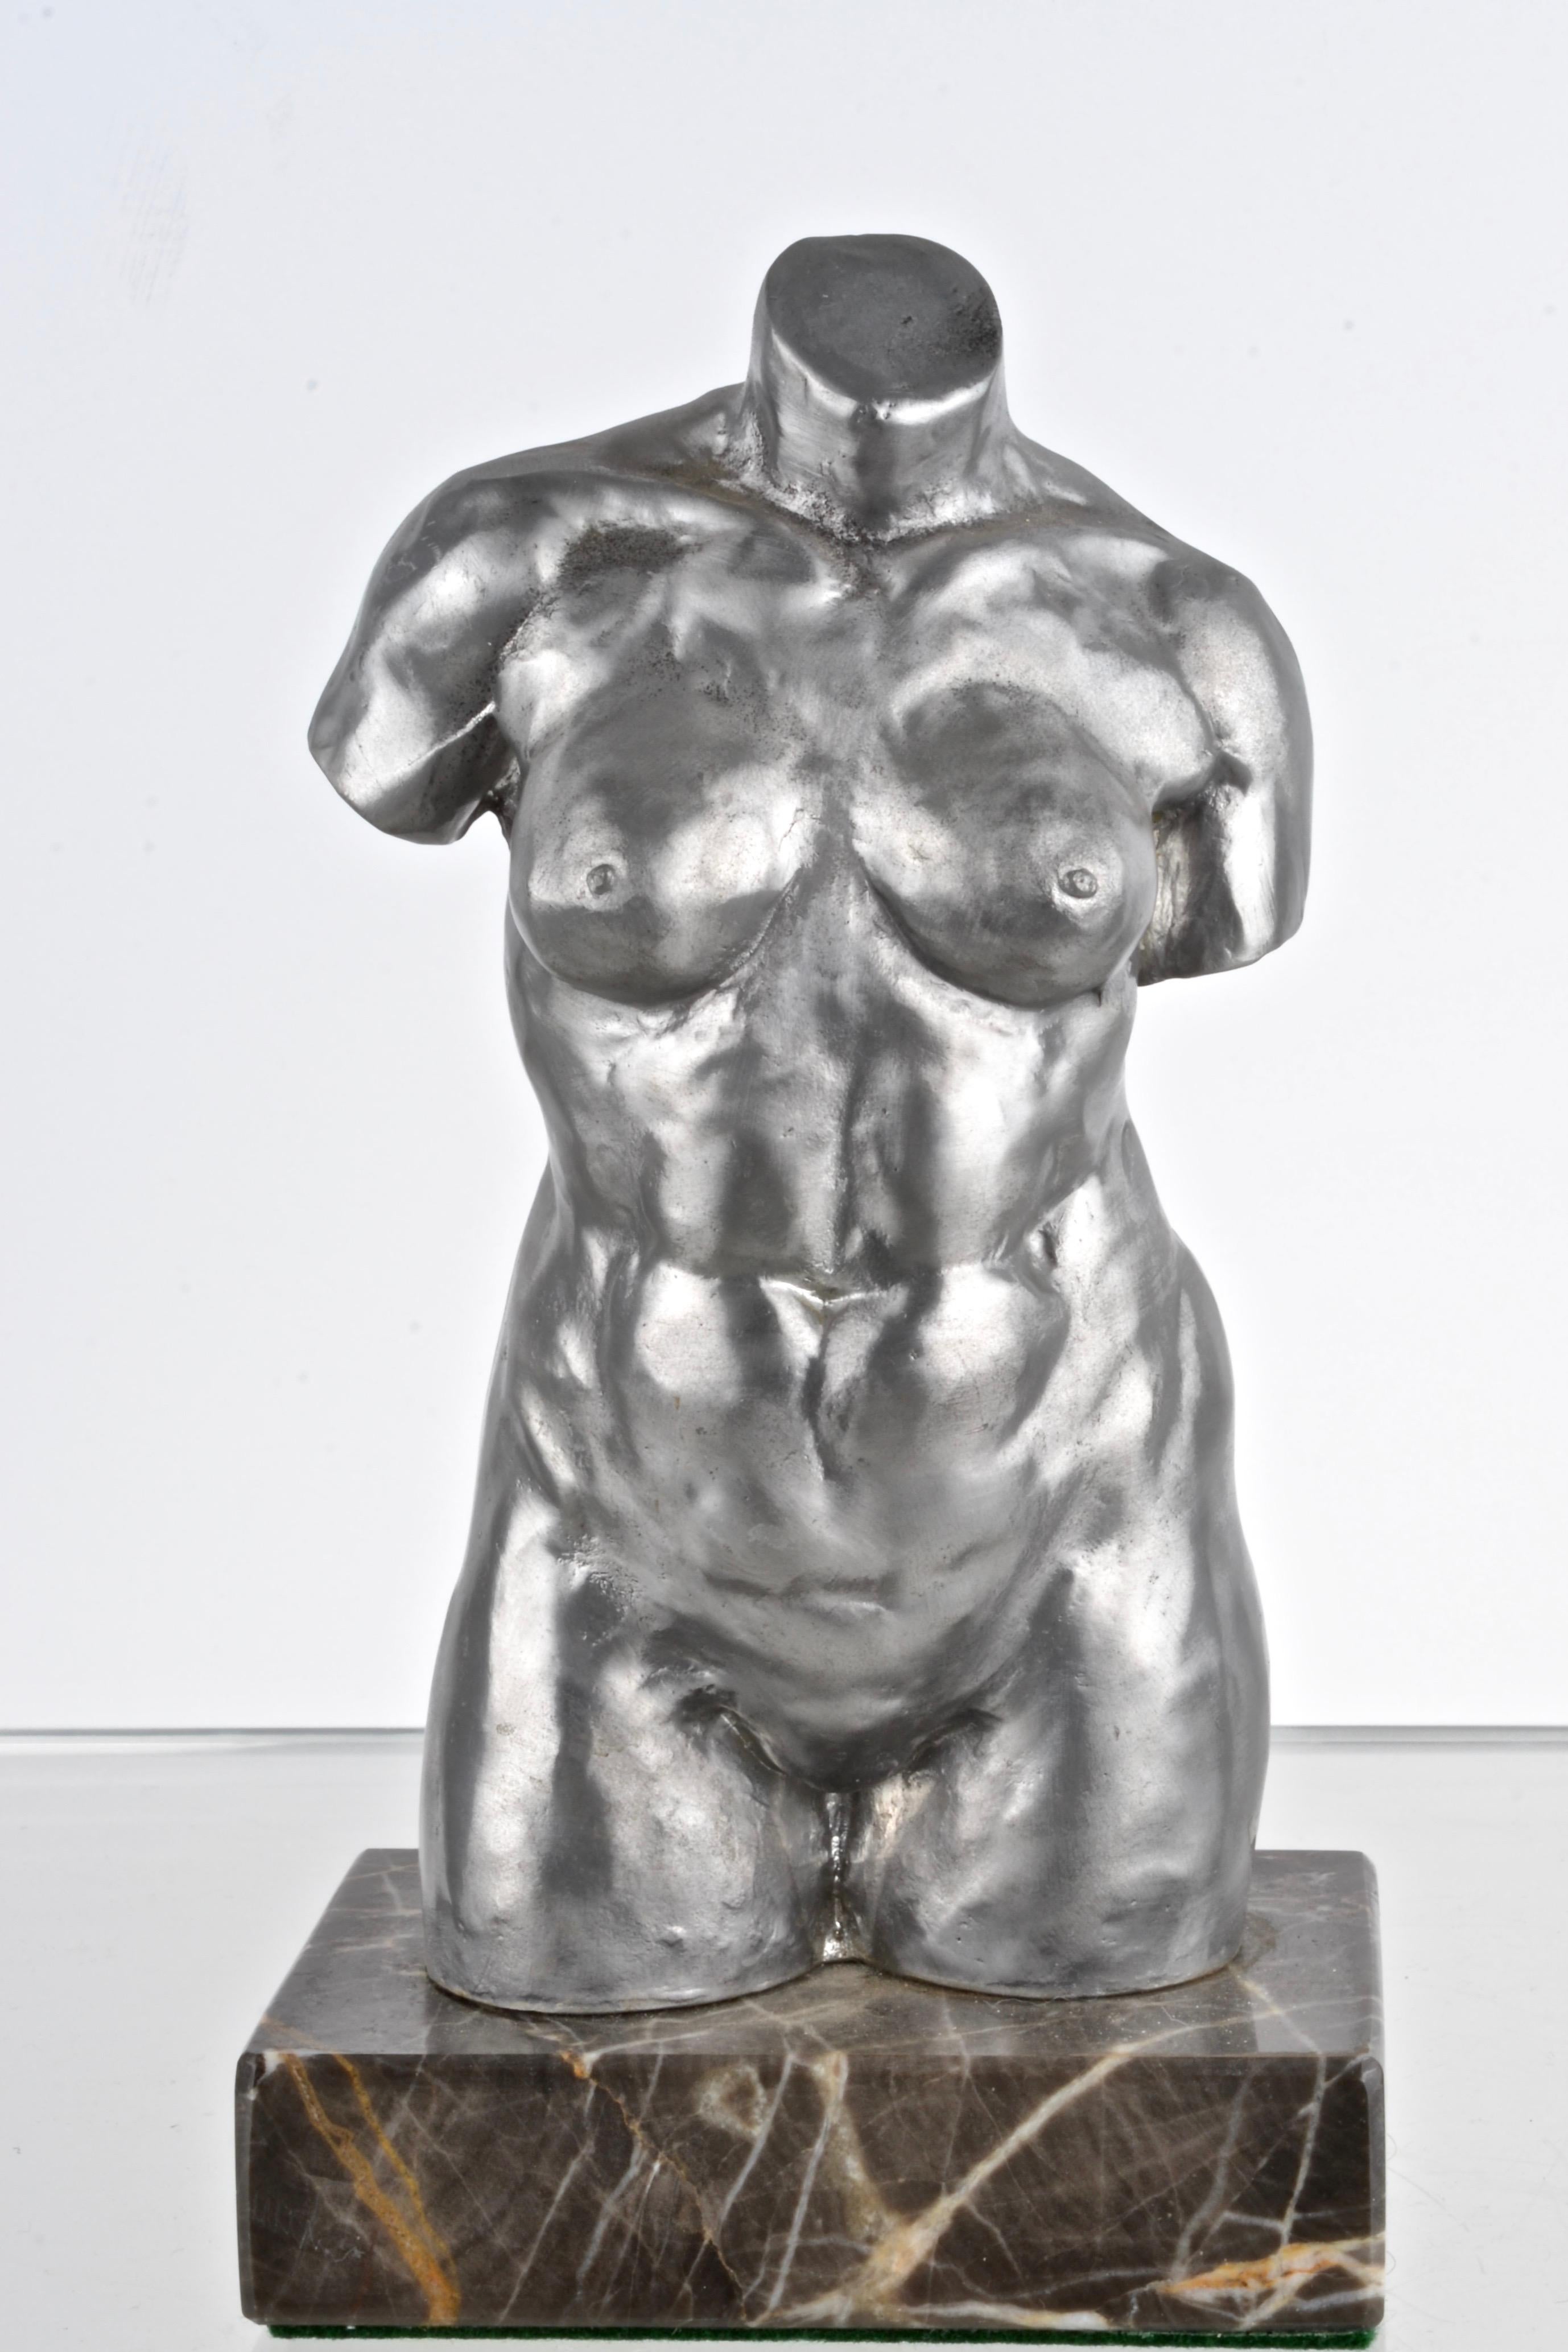 A finely cast female torso in pewter mounted on a marble base. Signed A.H.E.T. and RF Pewter.